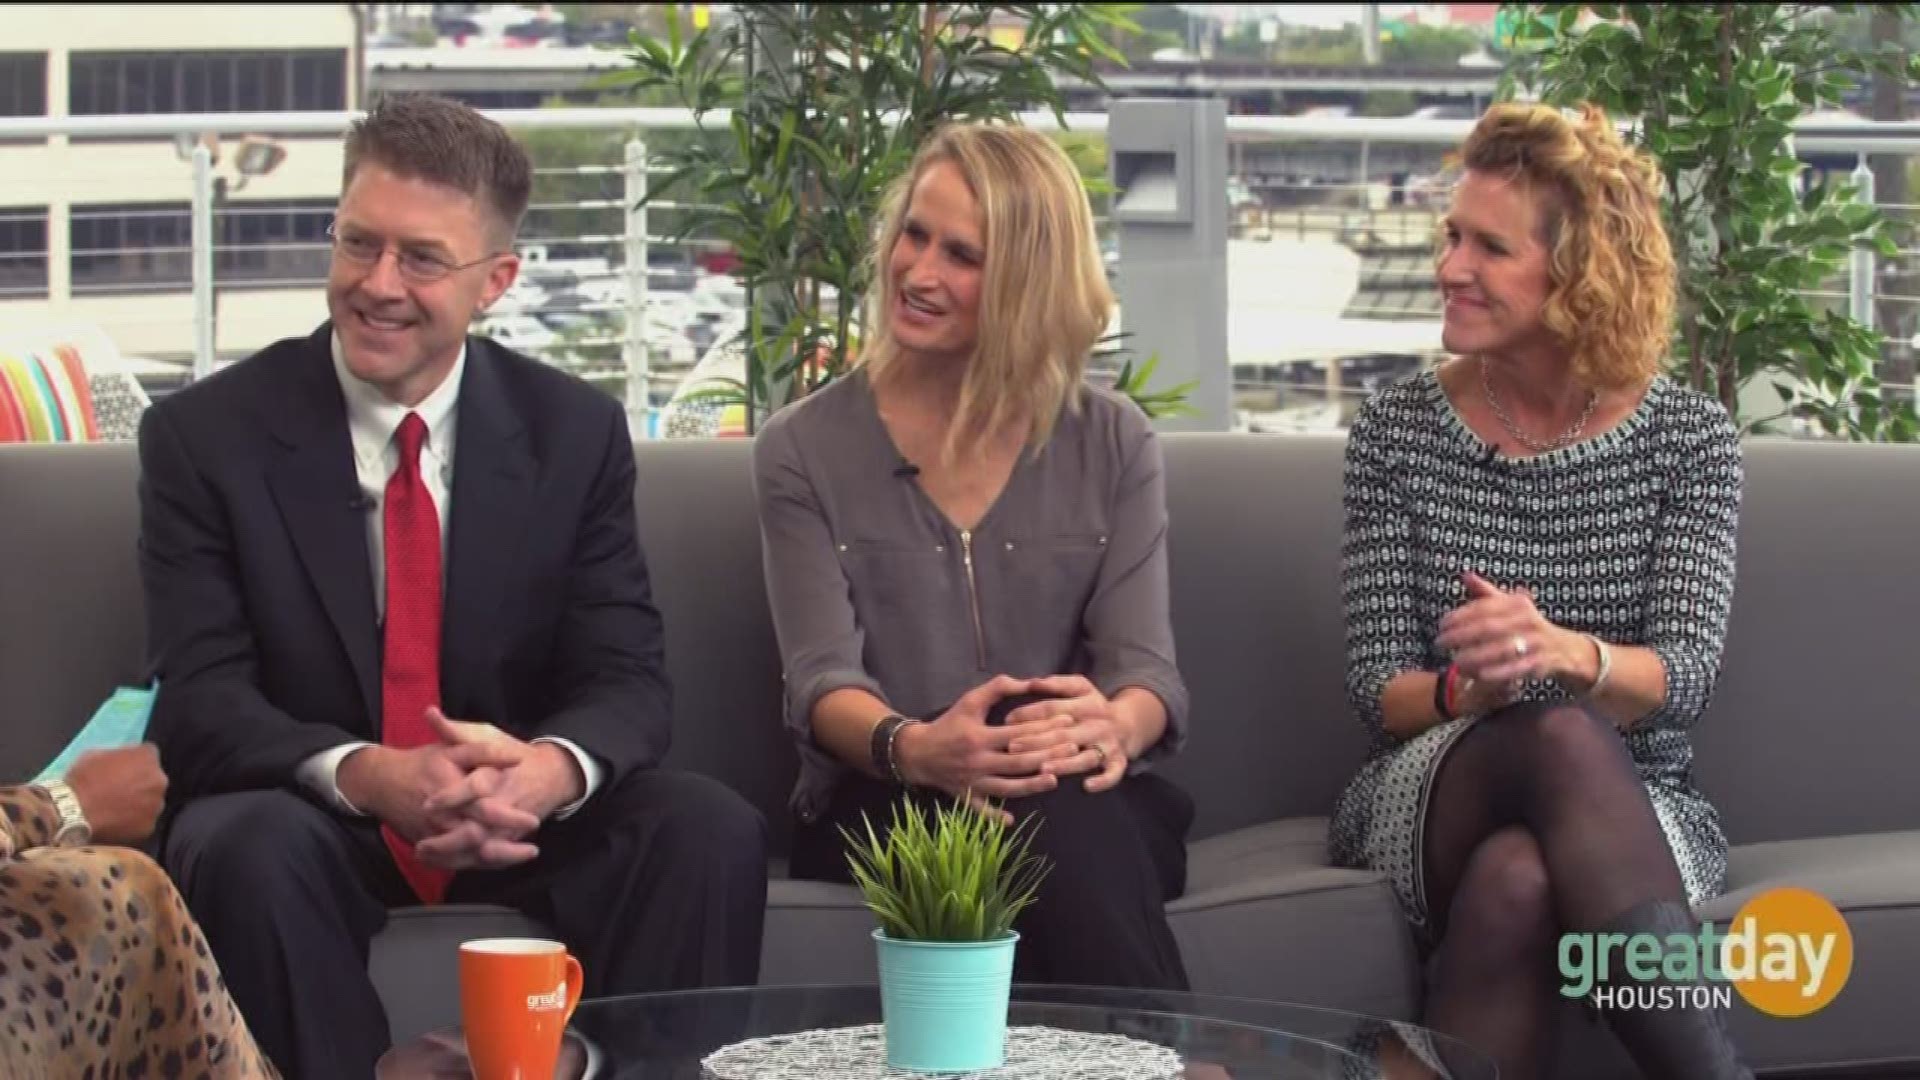 Dr. Matthew Anderson and Kathy Sanford from Premier Vein & Vascular Center explain how varicose veins are more than a cosmetic issue. Diana Henk speaks about how Premier helped her return to running.